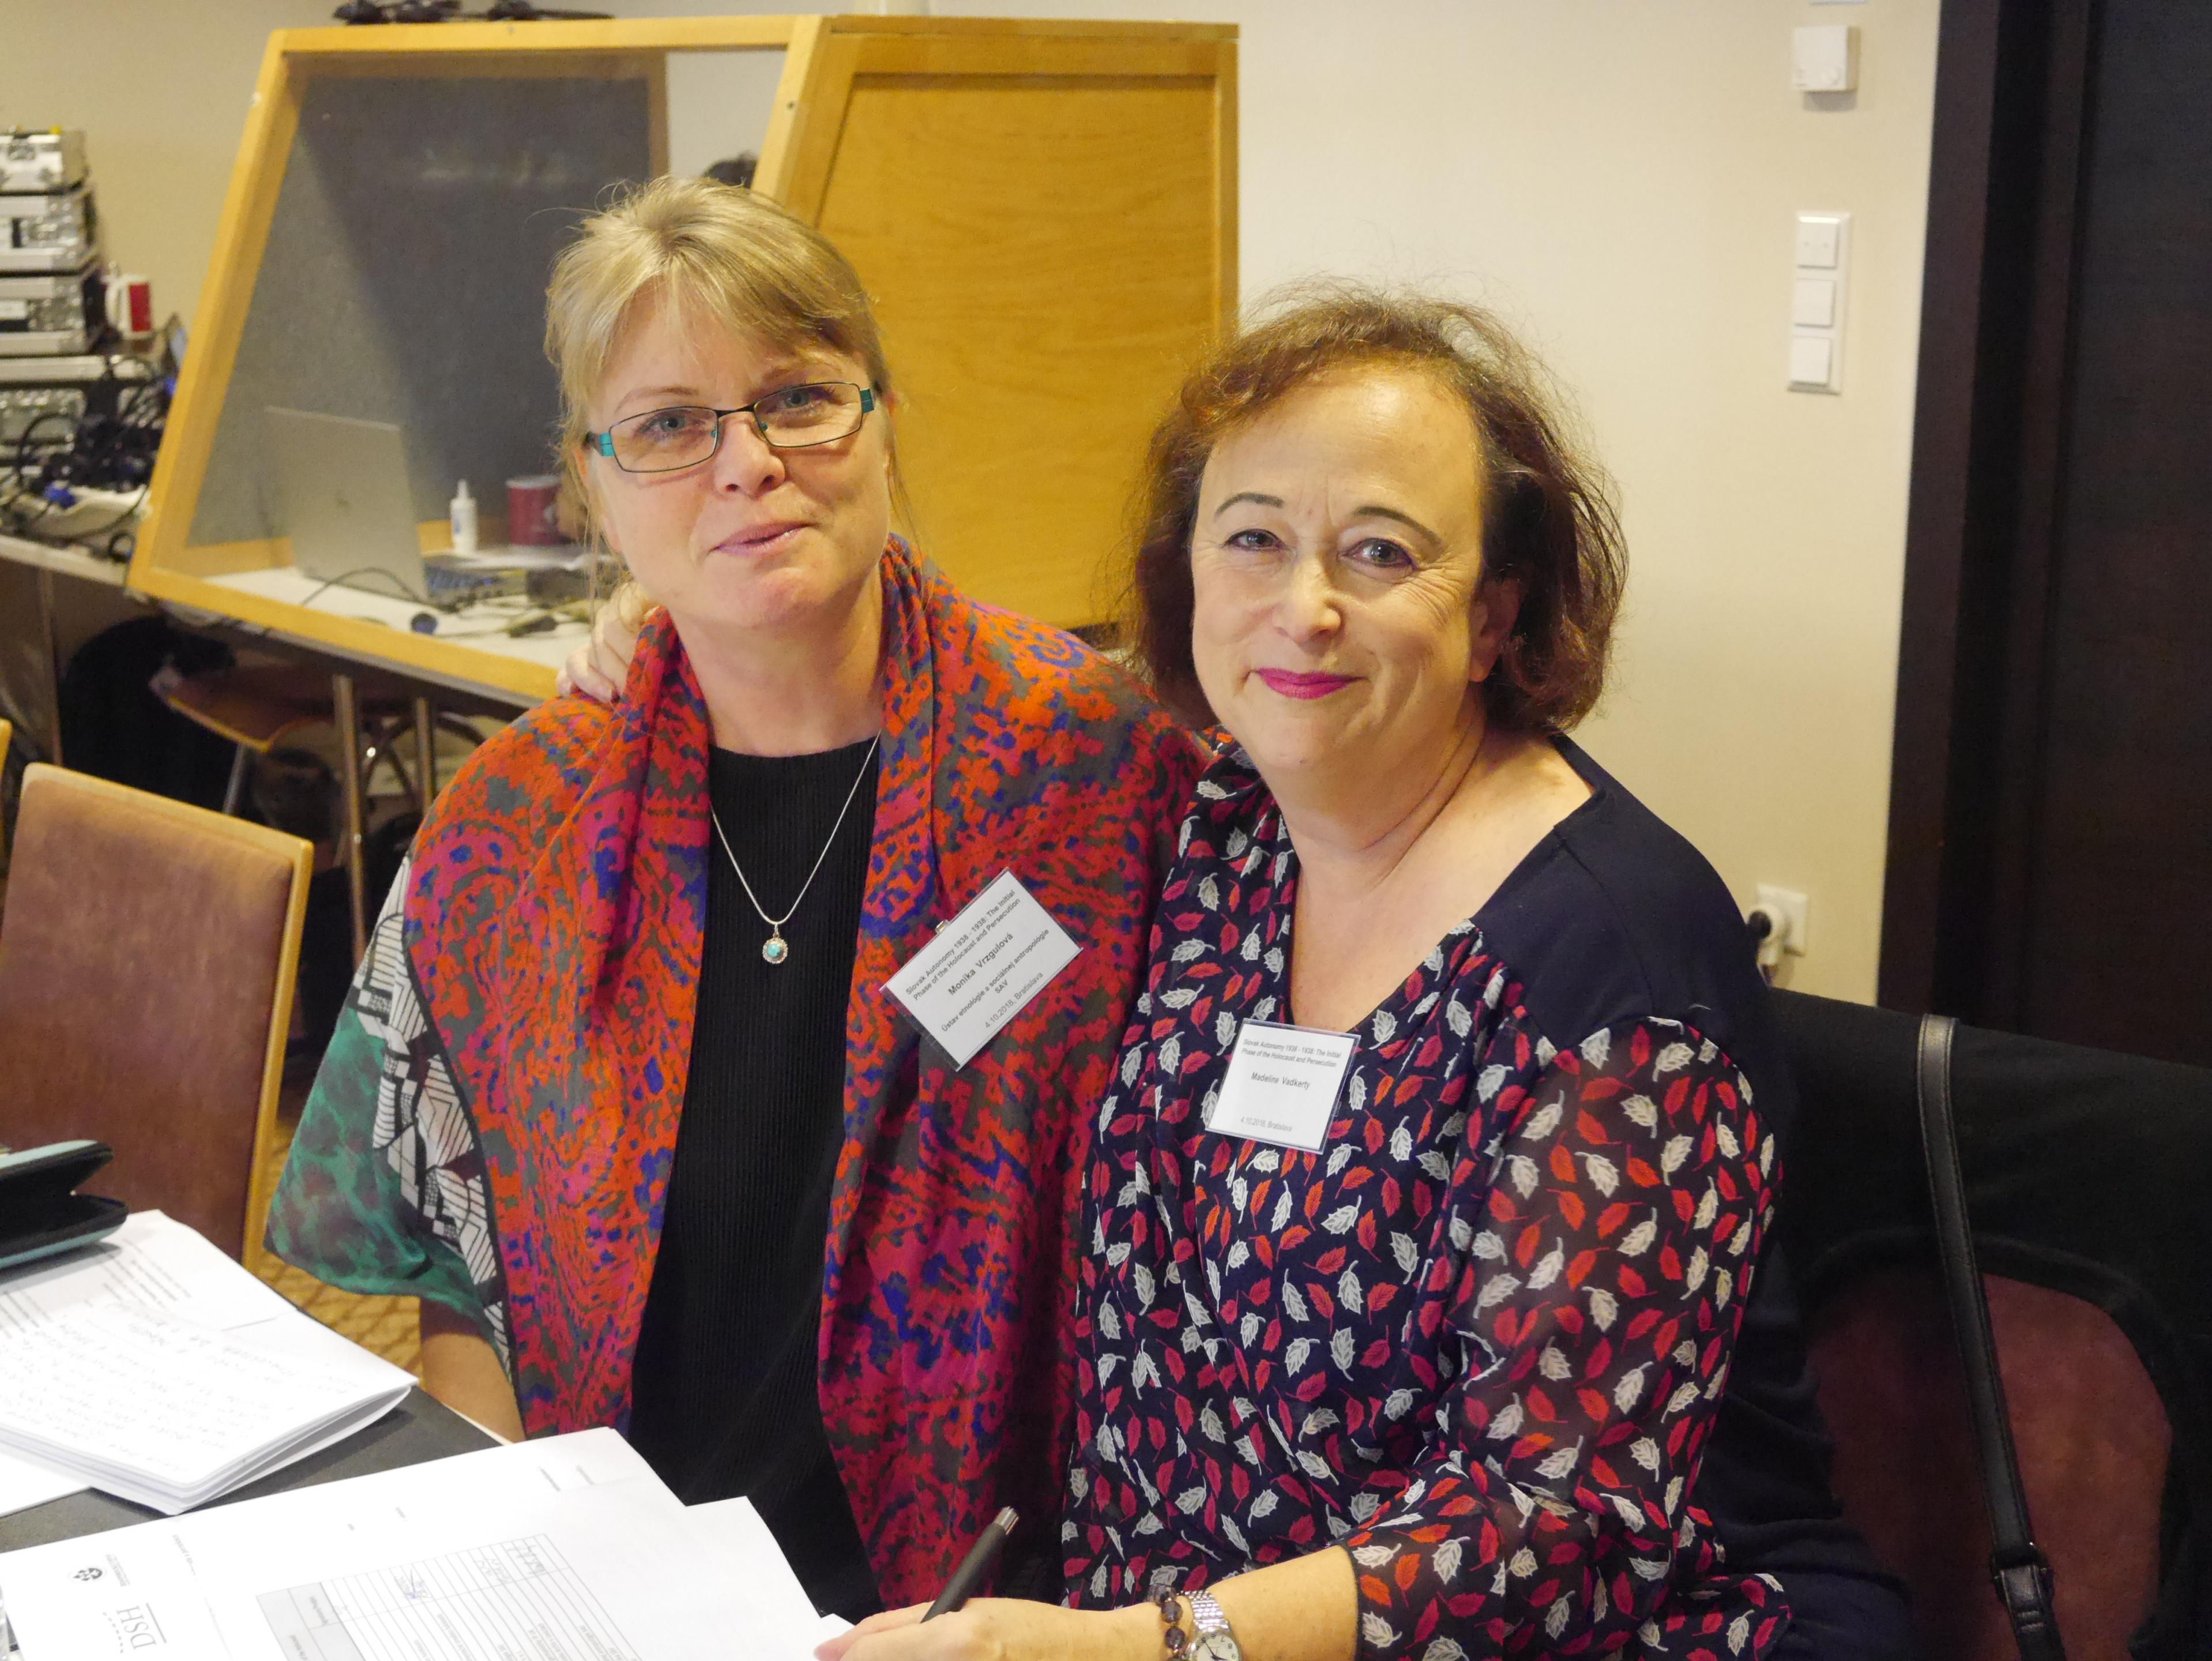 Two participants of the EHRI workshop